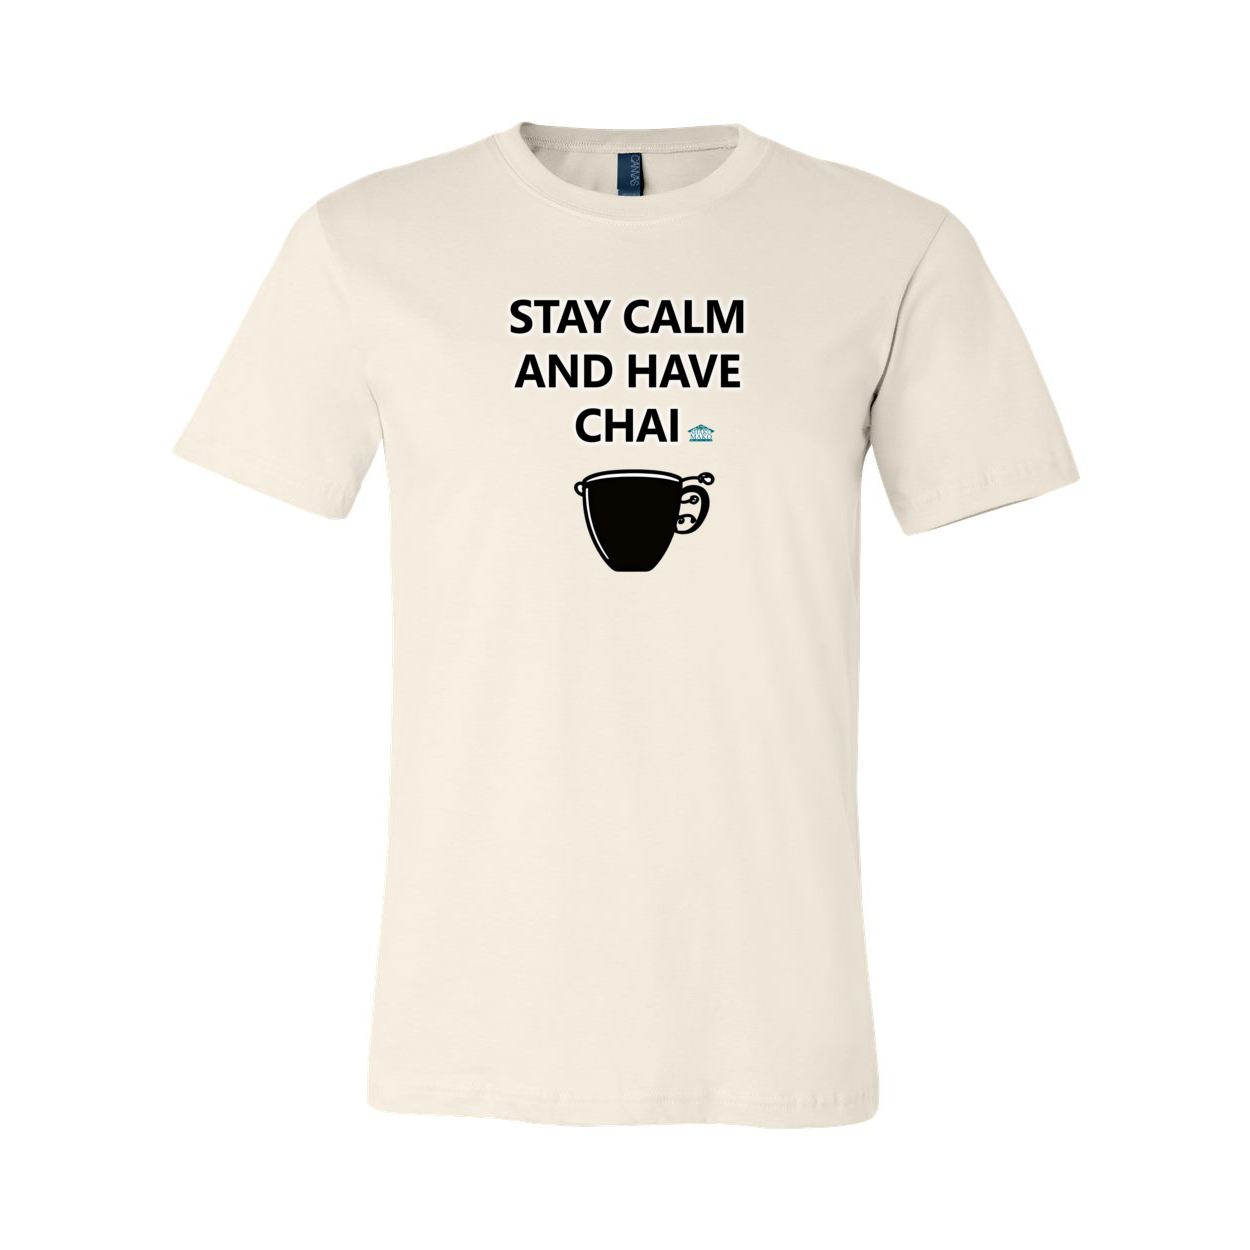 Stay Calm and have Chai